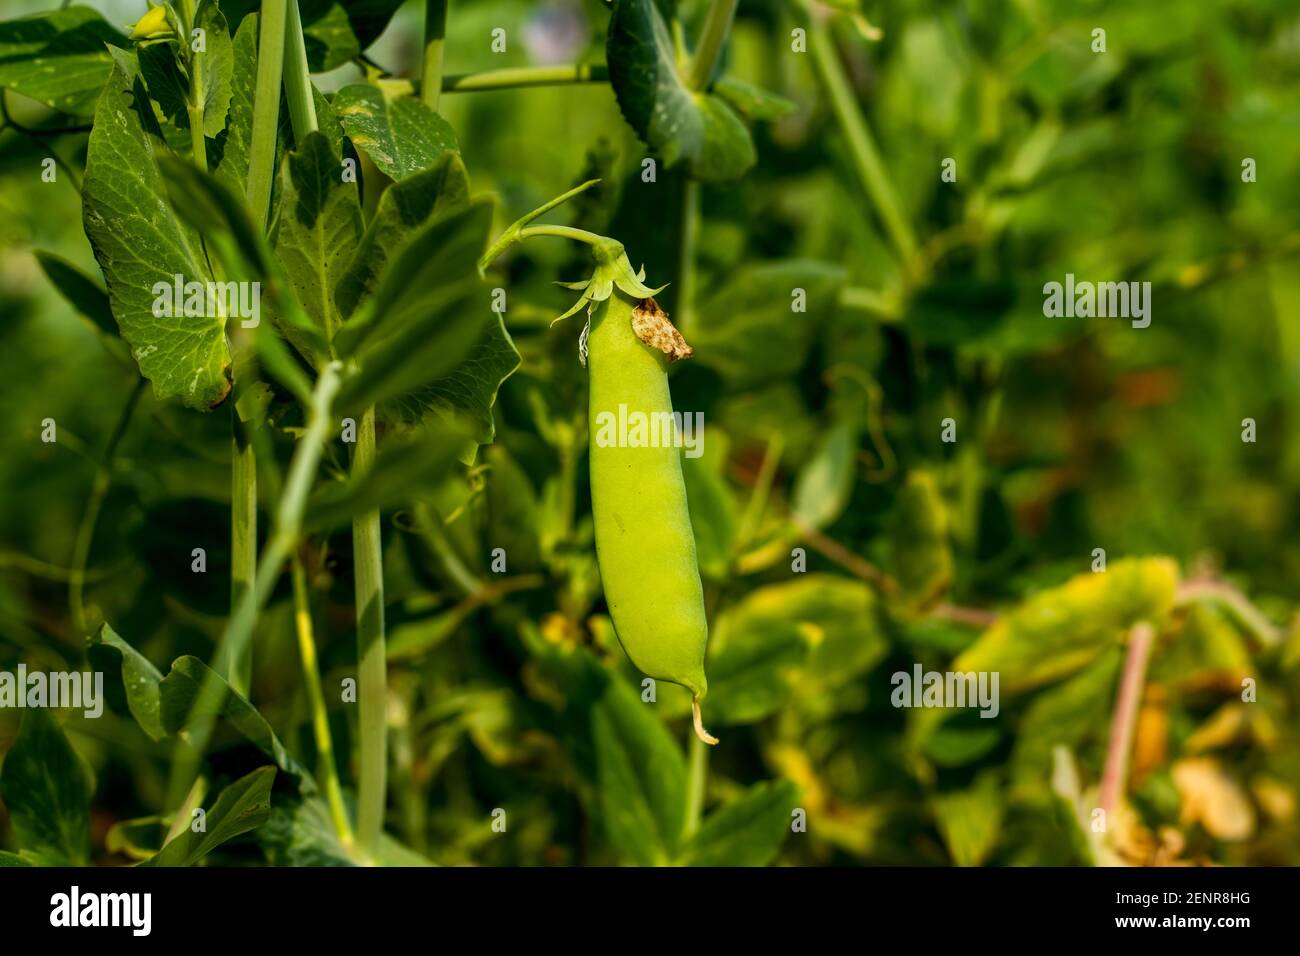 Pisum sativum or Peas are an annual cool-season legume Pea is an annual herbaceous plant with racemose inflorescences arising from the leaf axils, it Stock Photo